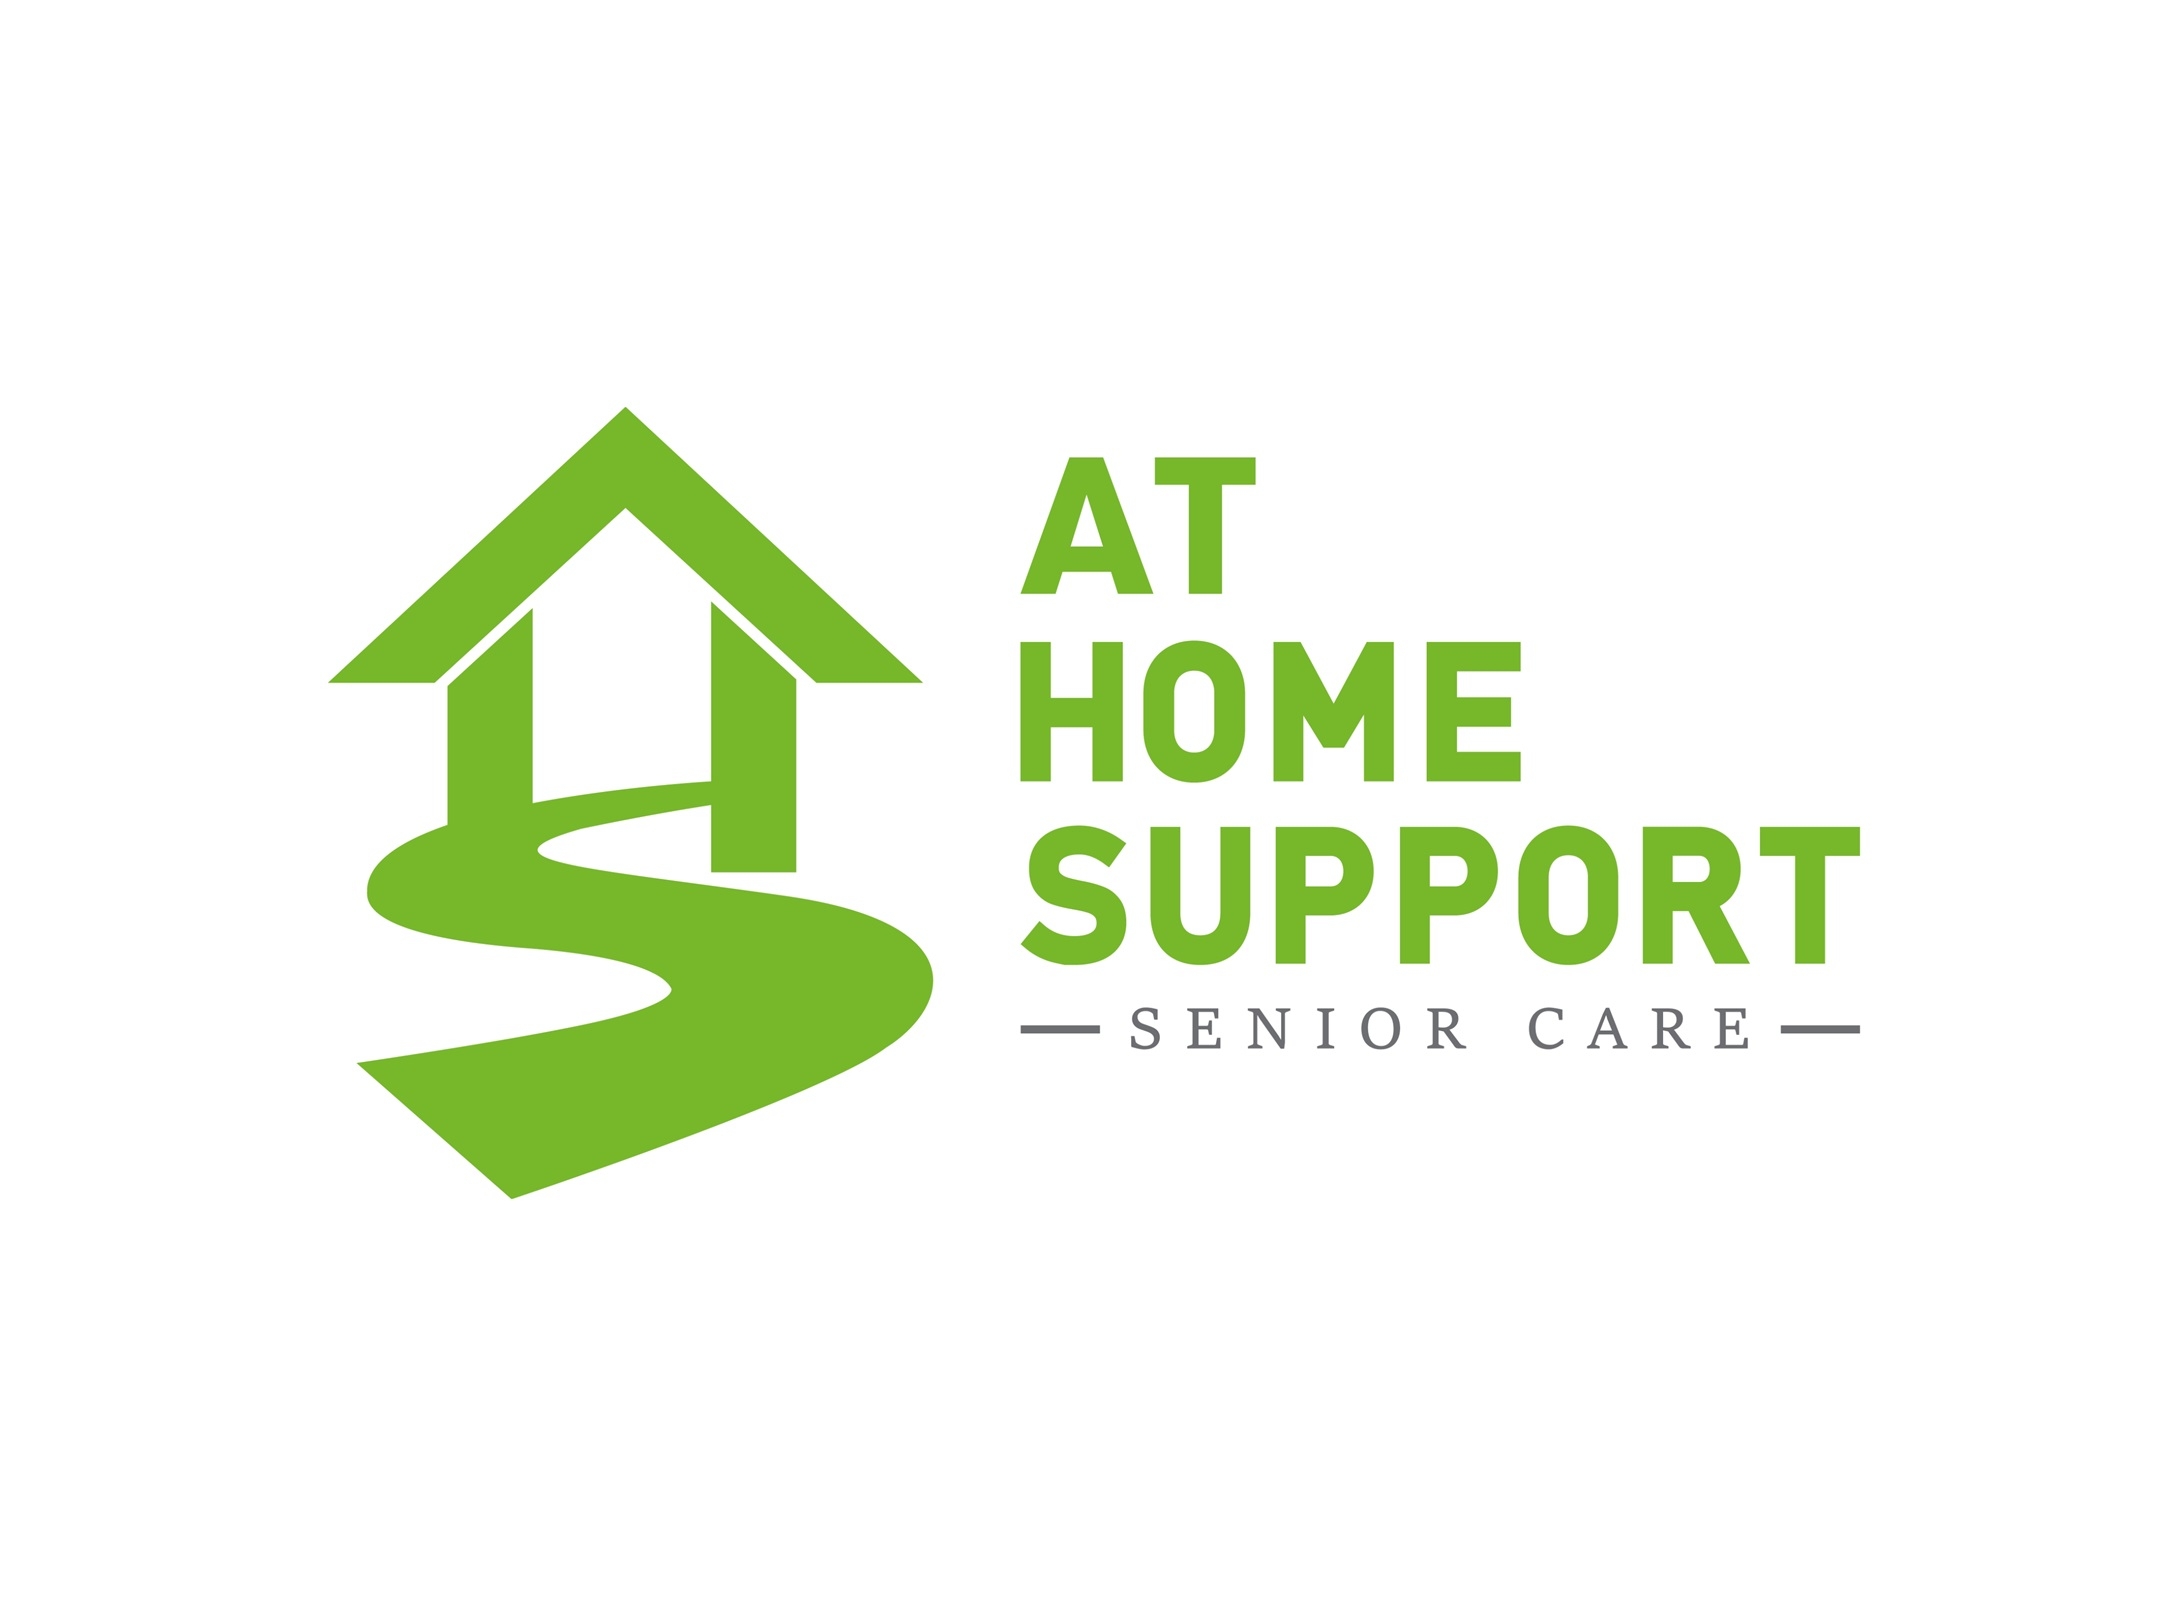 At Home Support Senior Care image